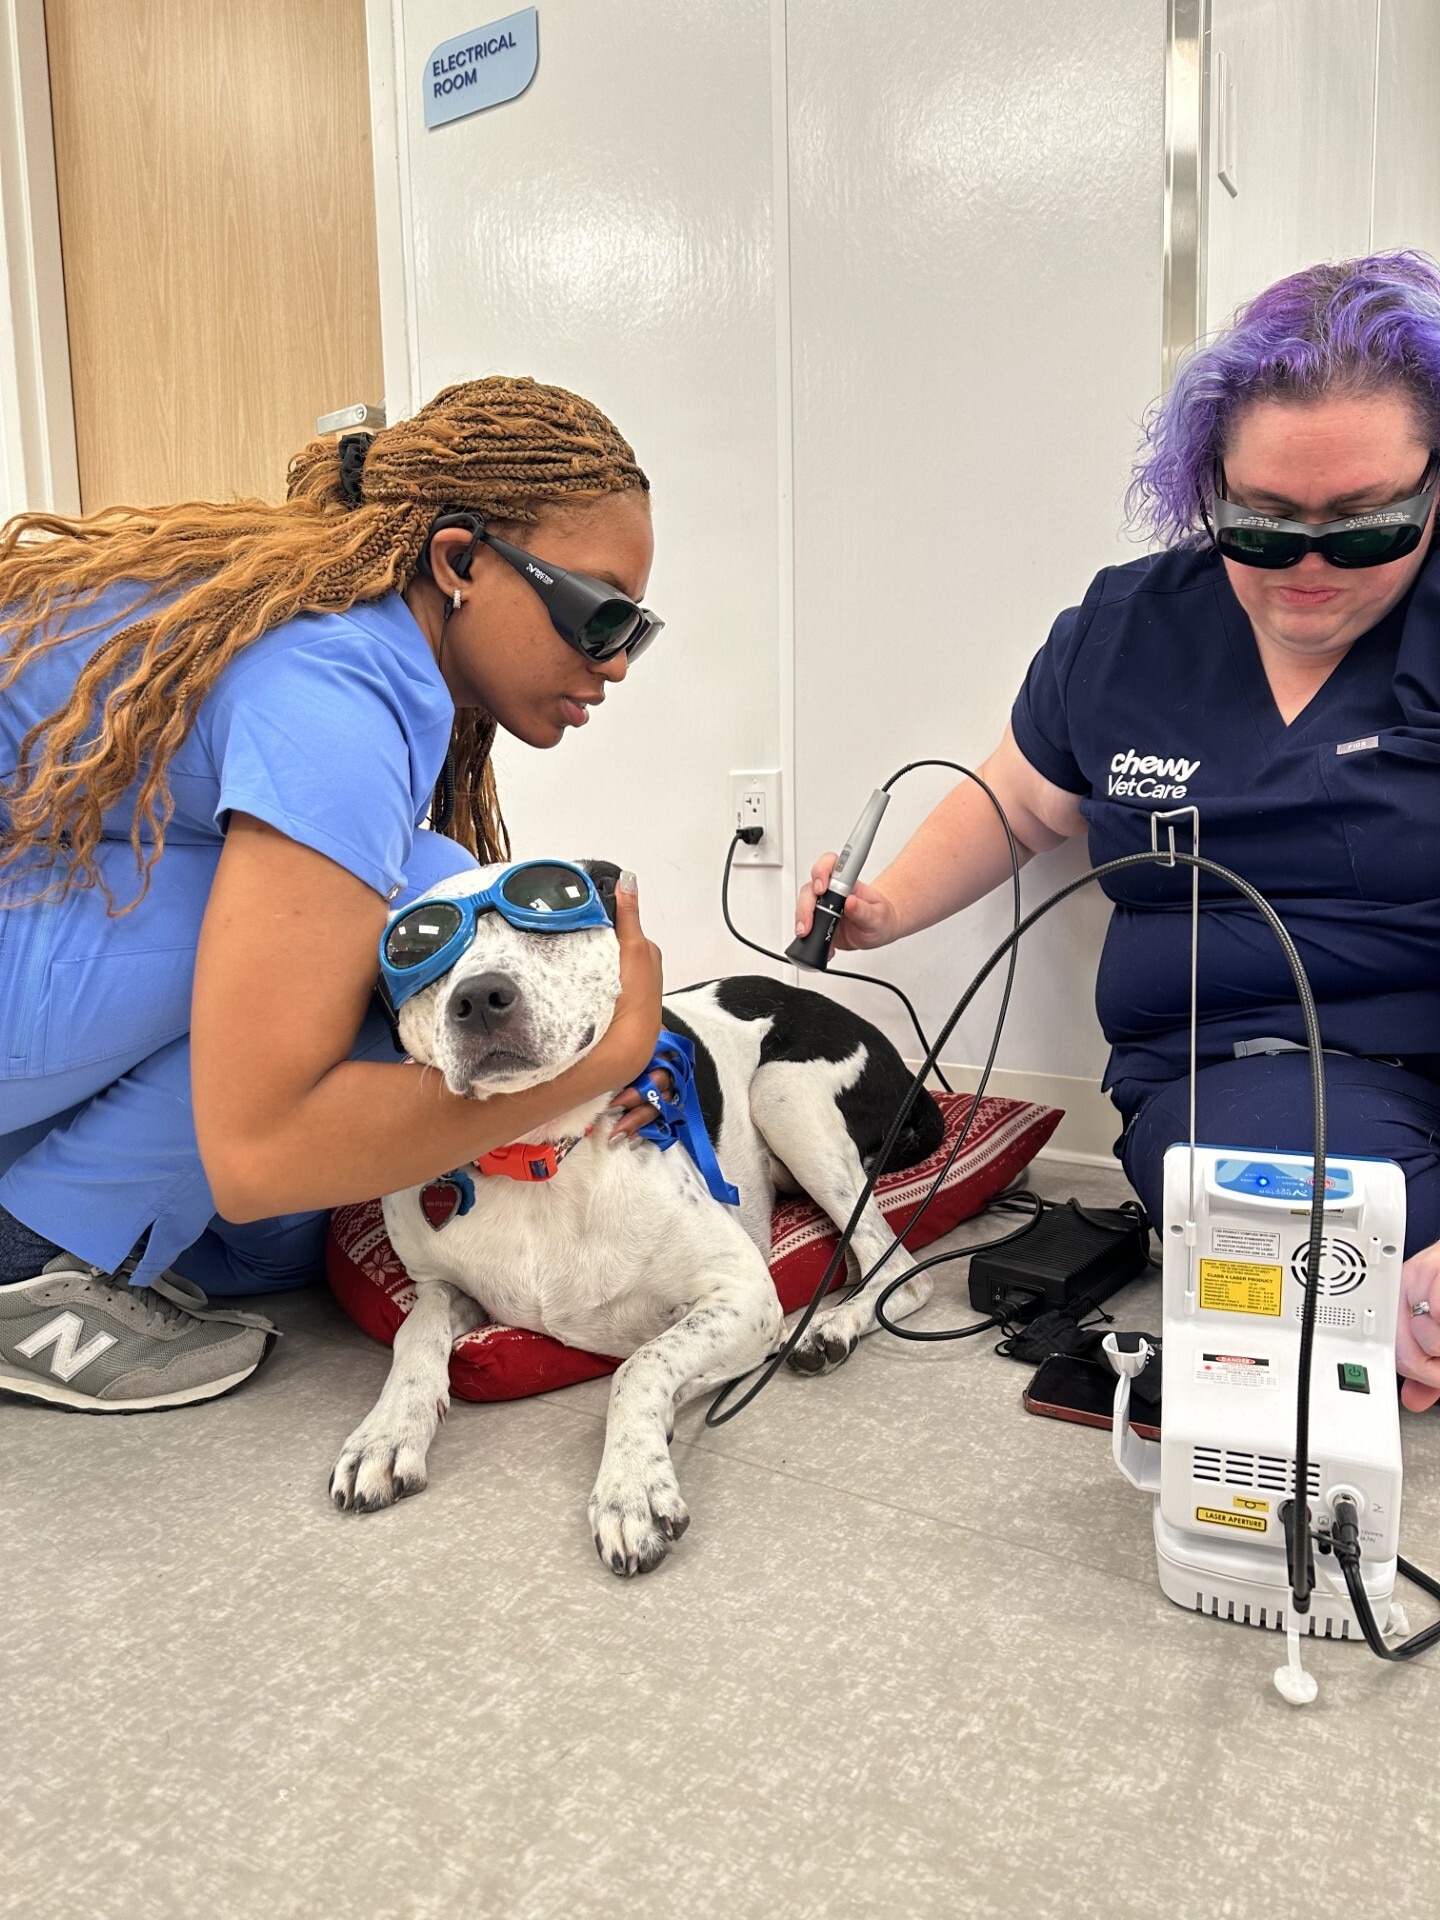 A dog gets laser therapy.